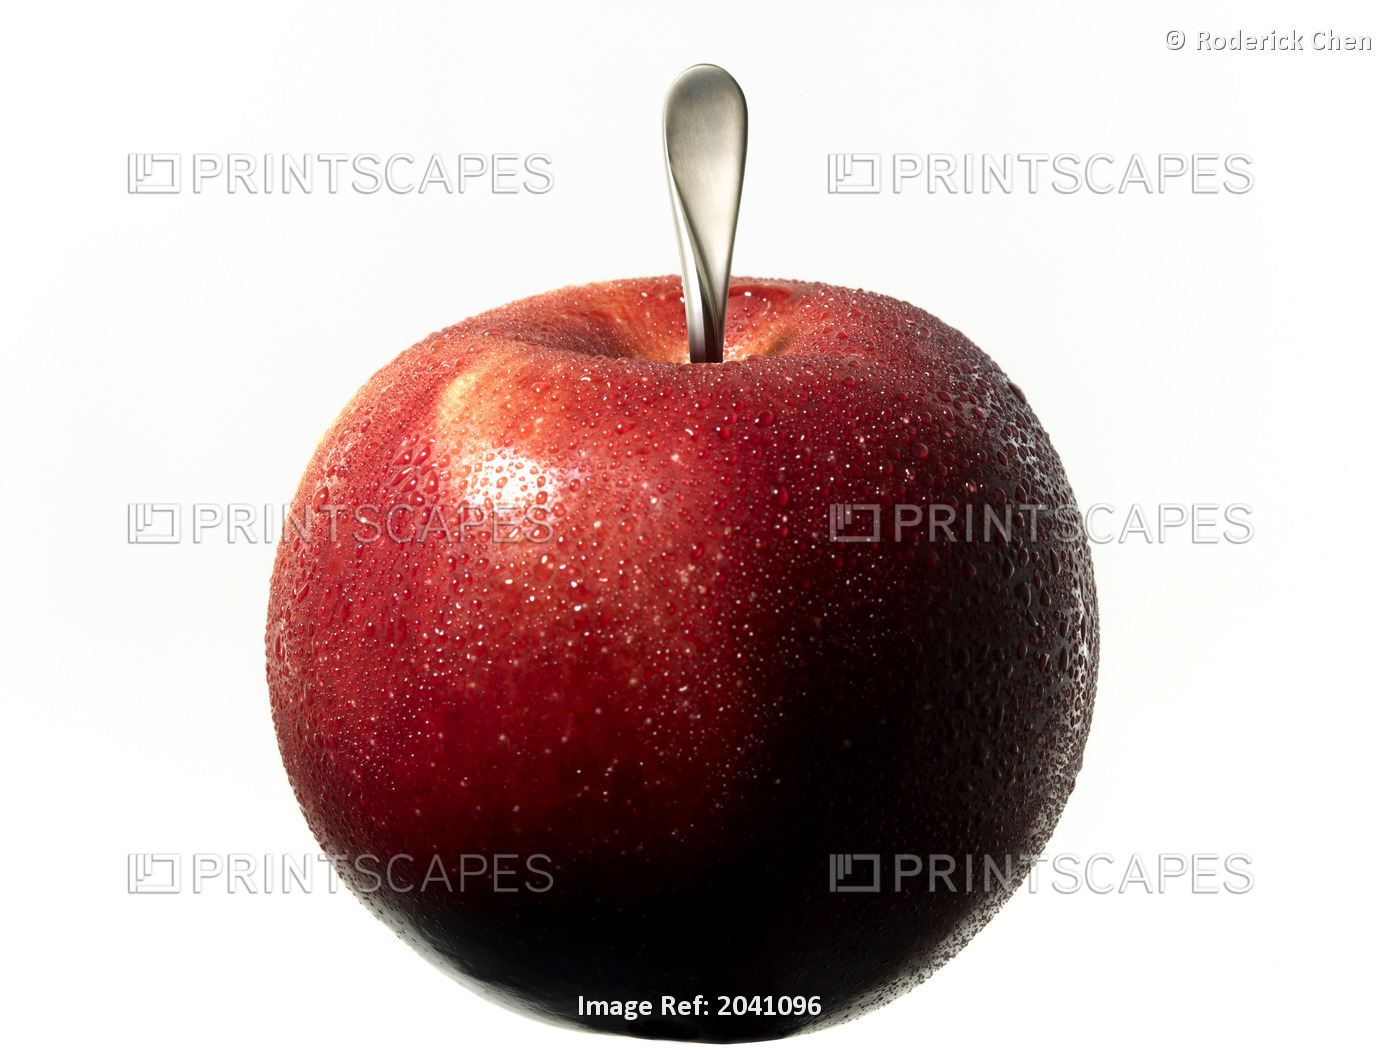 A Fresh Apple With A Silver Spoon Handle For The Stem On A White Background